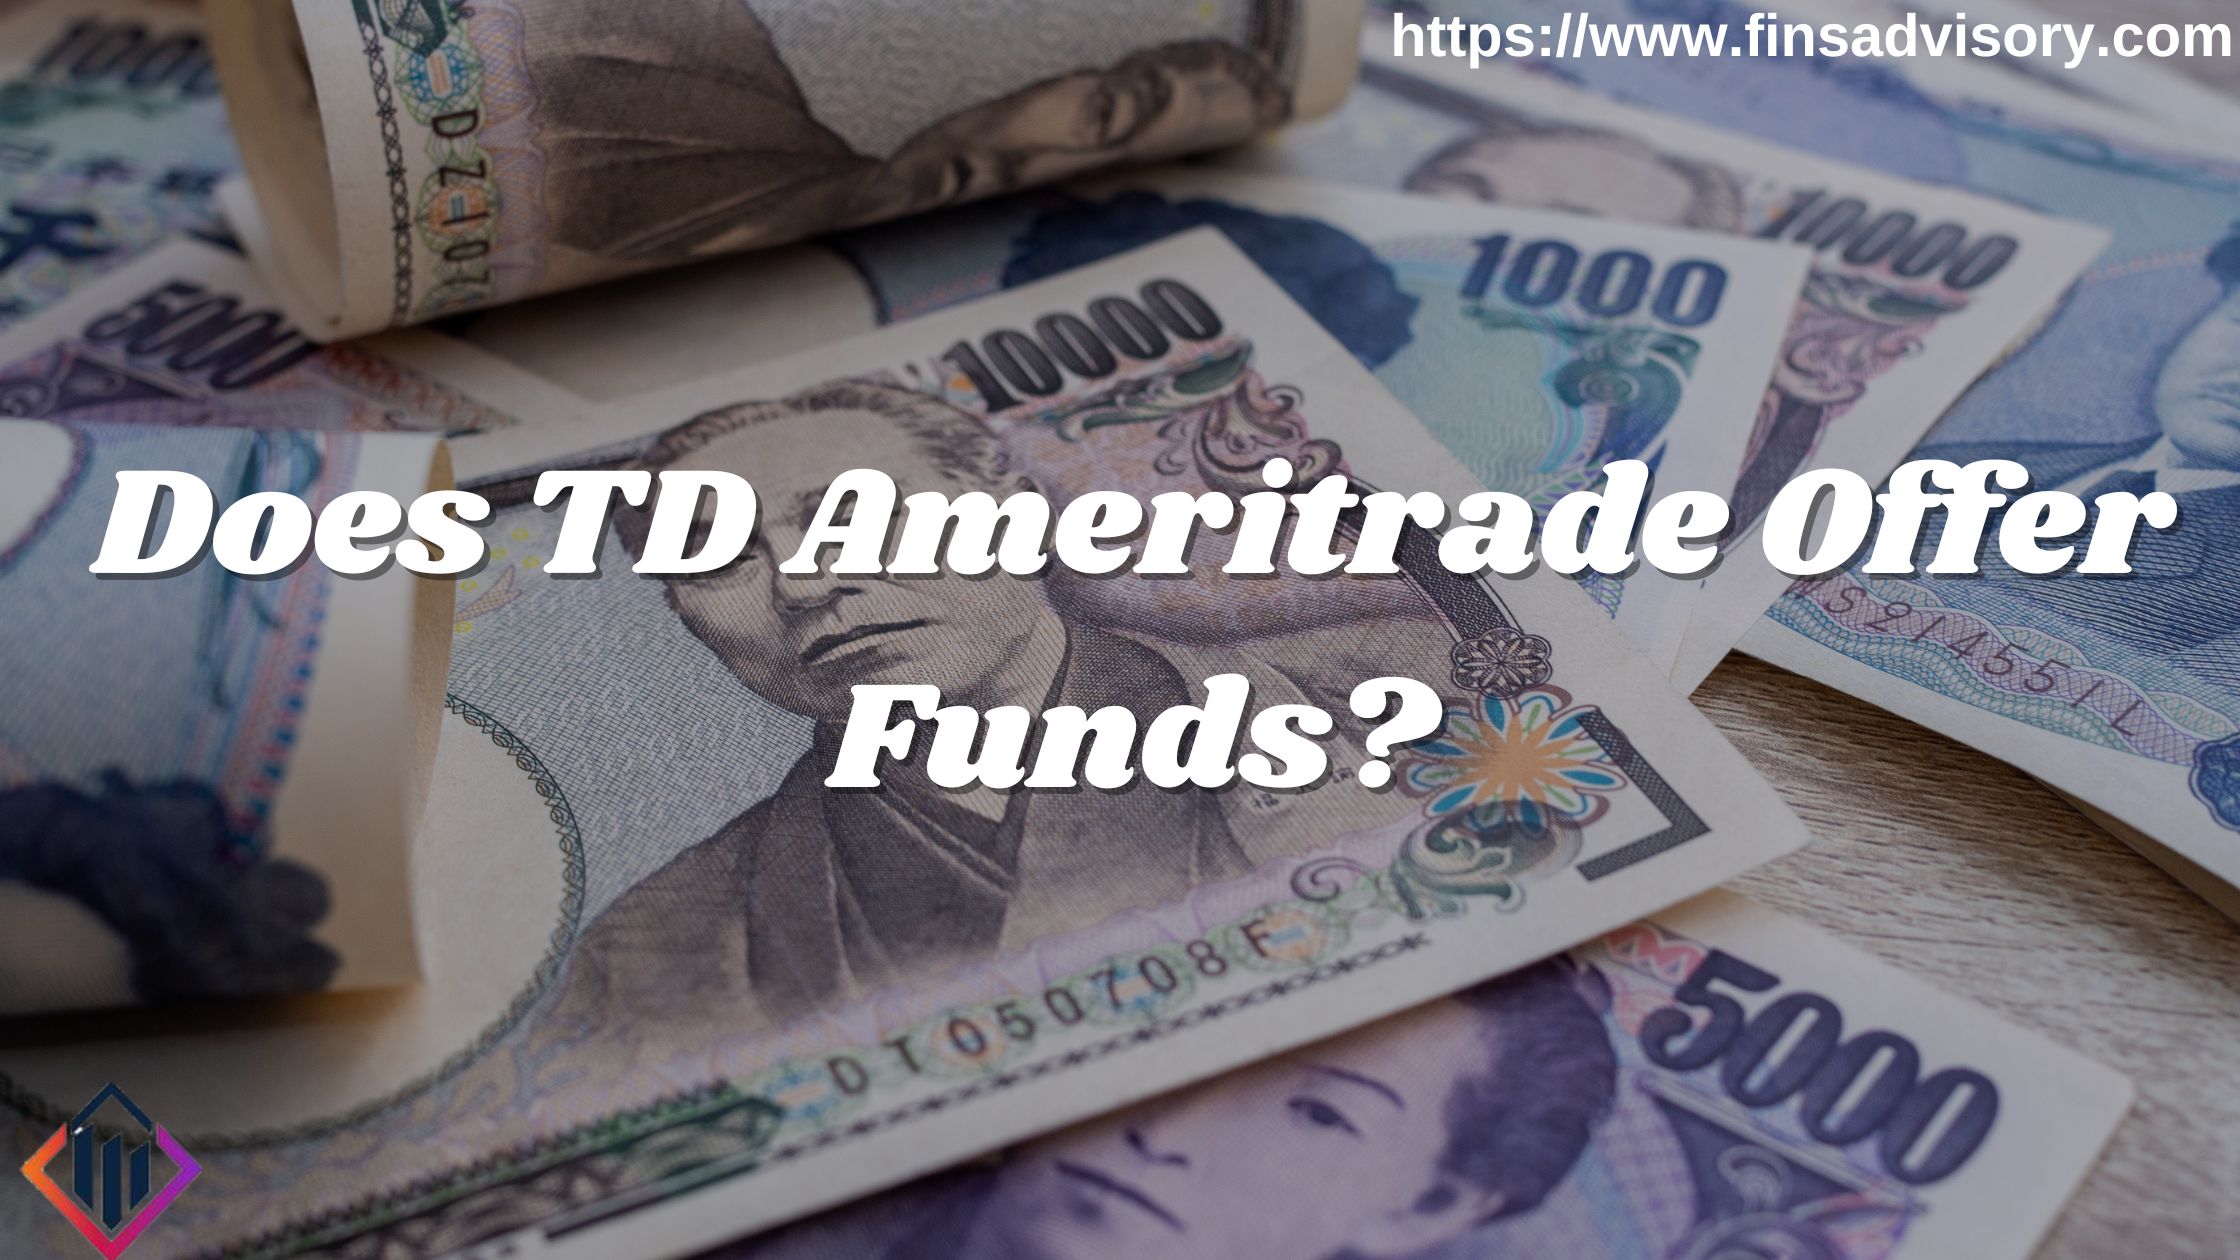 Does TD Ameritrade Offer Funds?